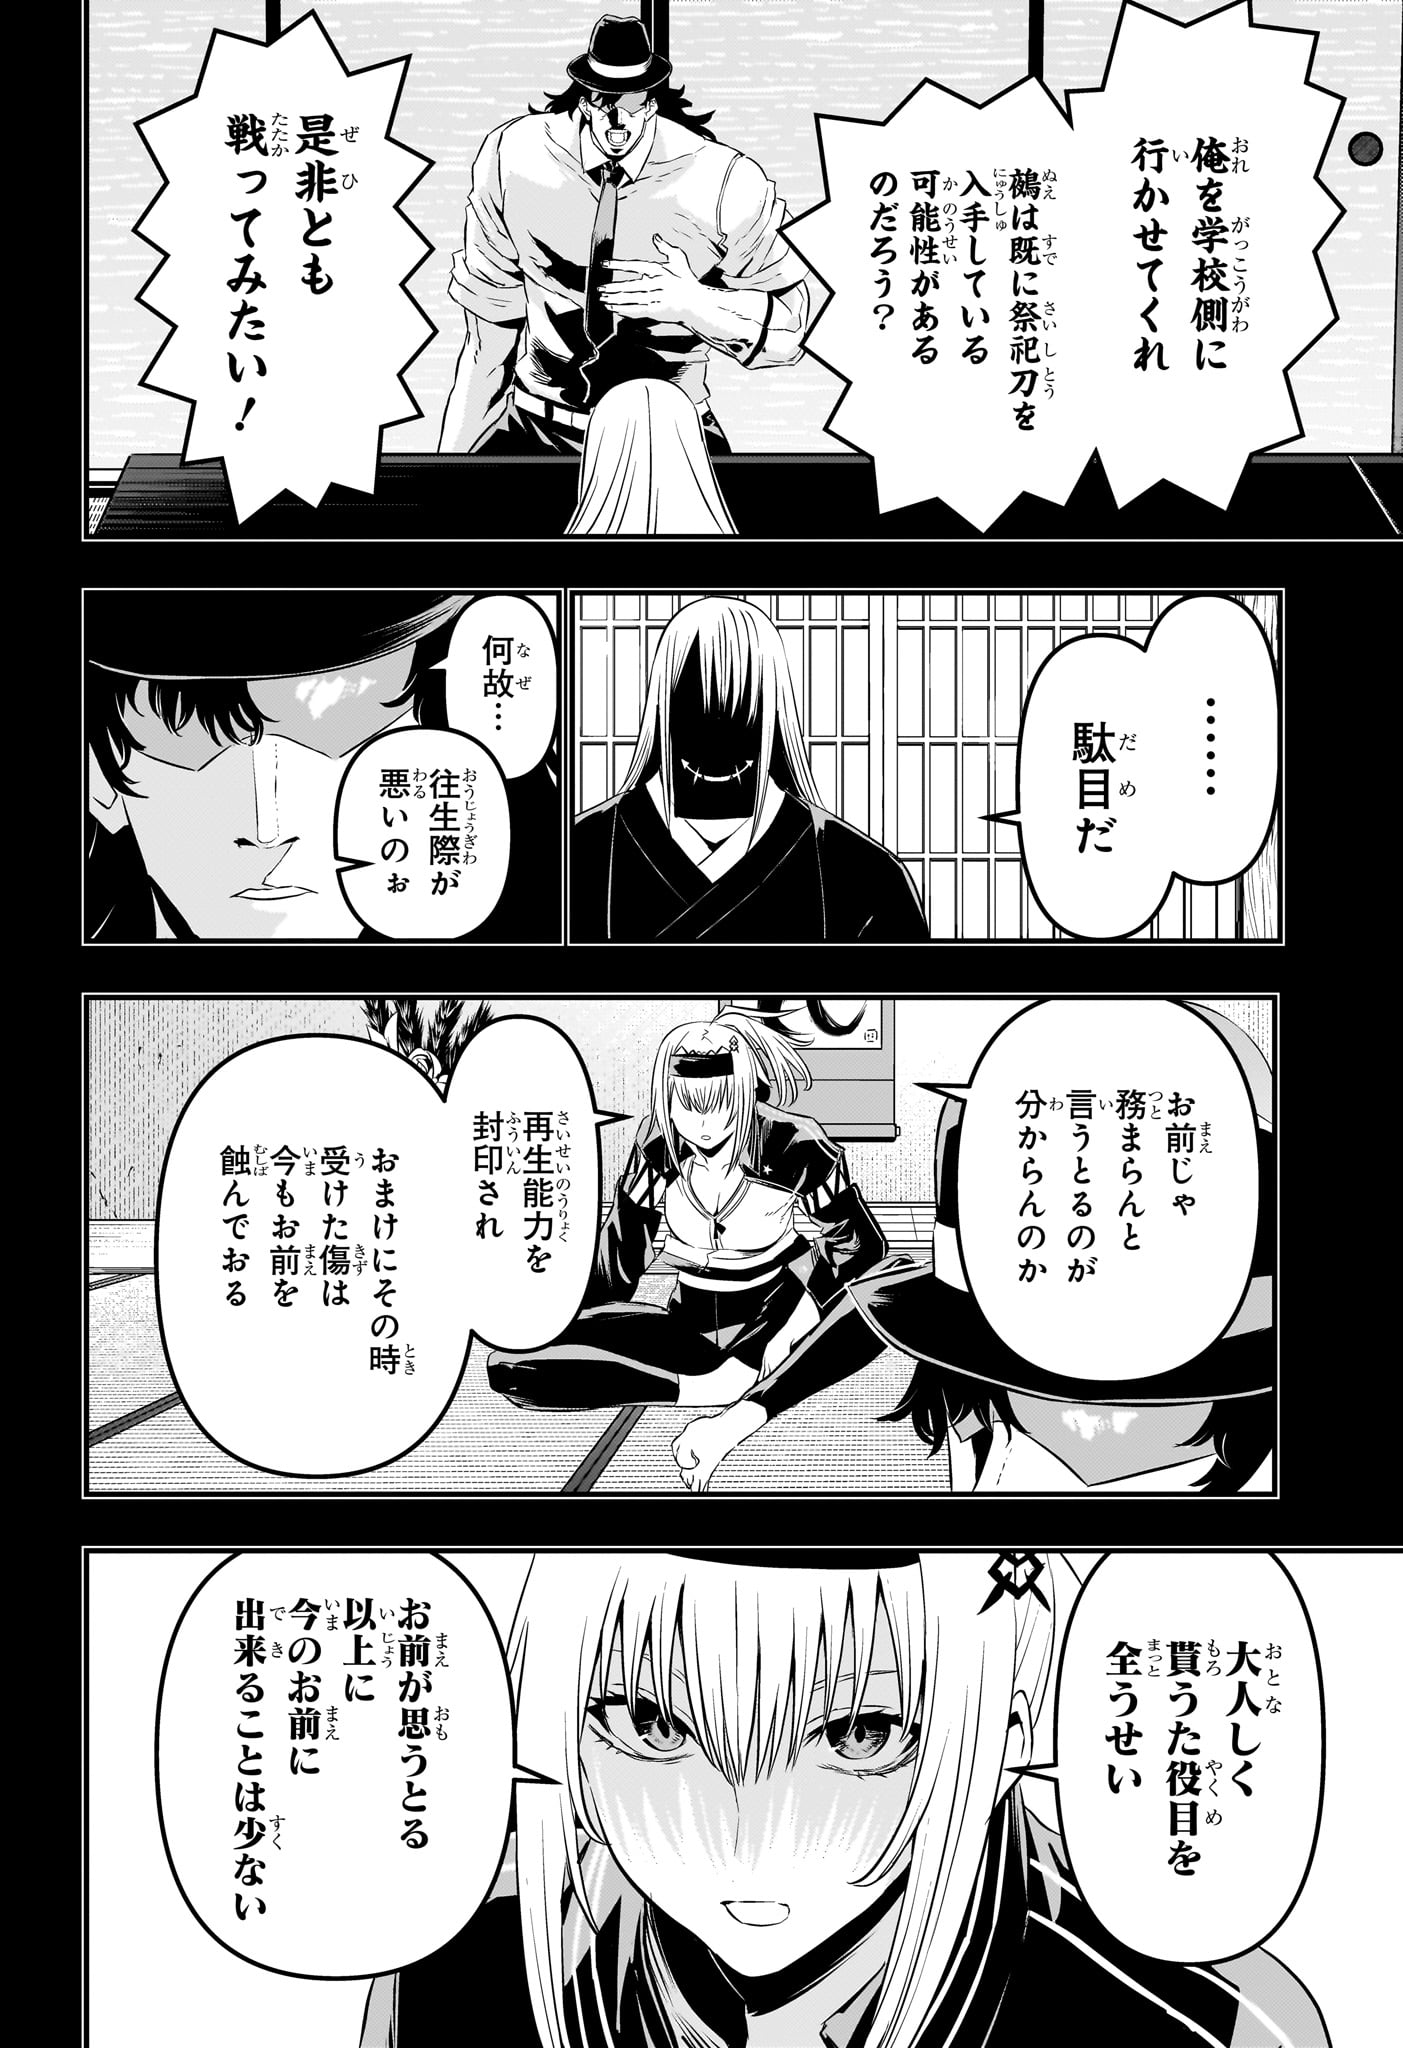 Nue no Onmyouji - Chapter 57 - Page 4